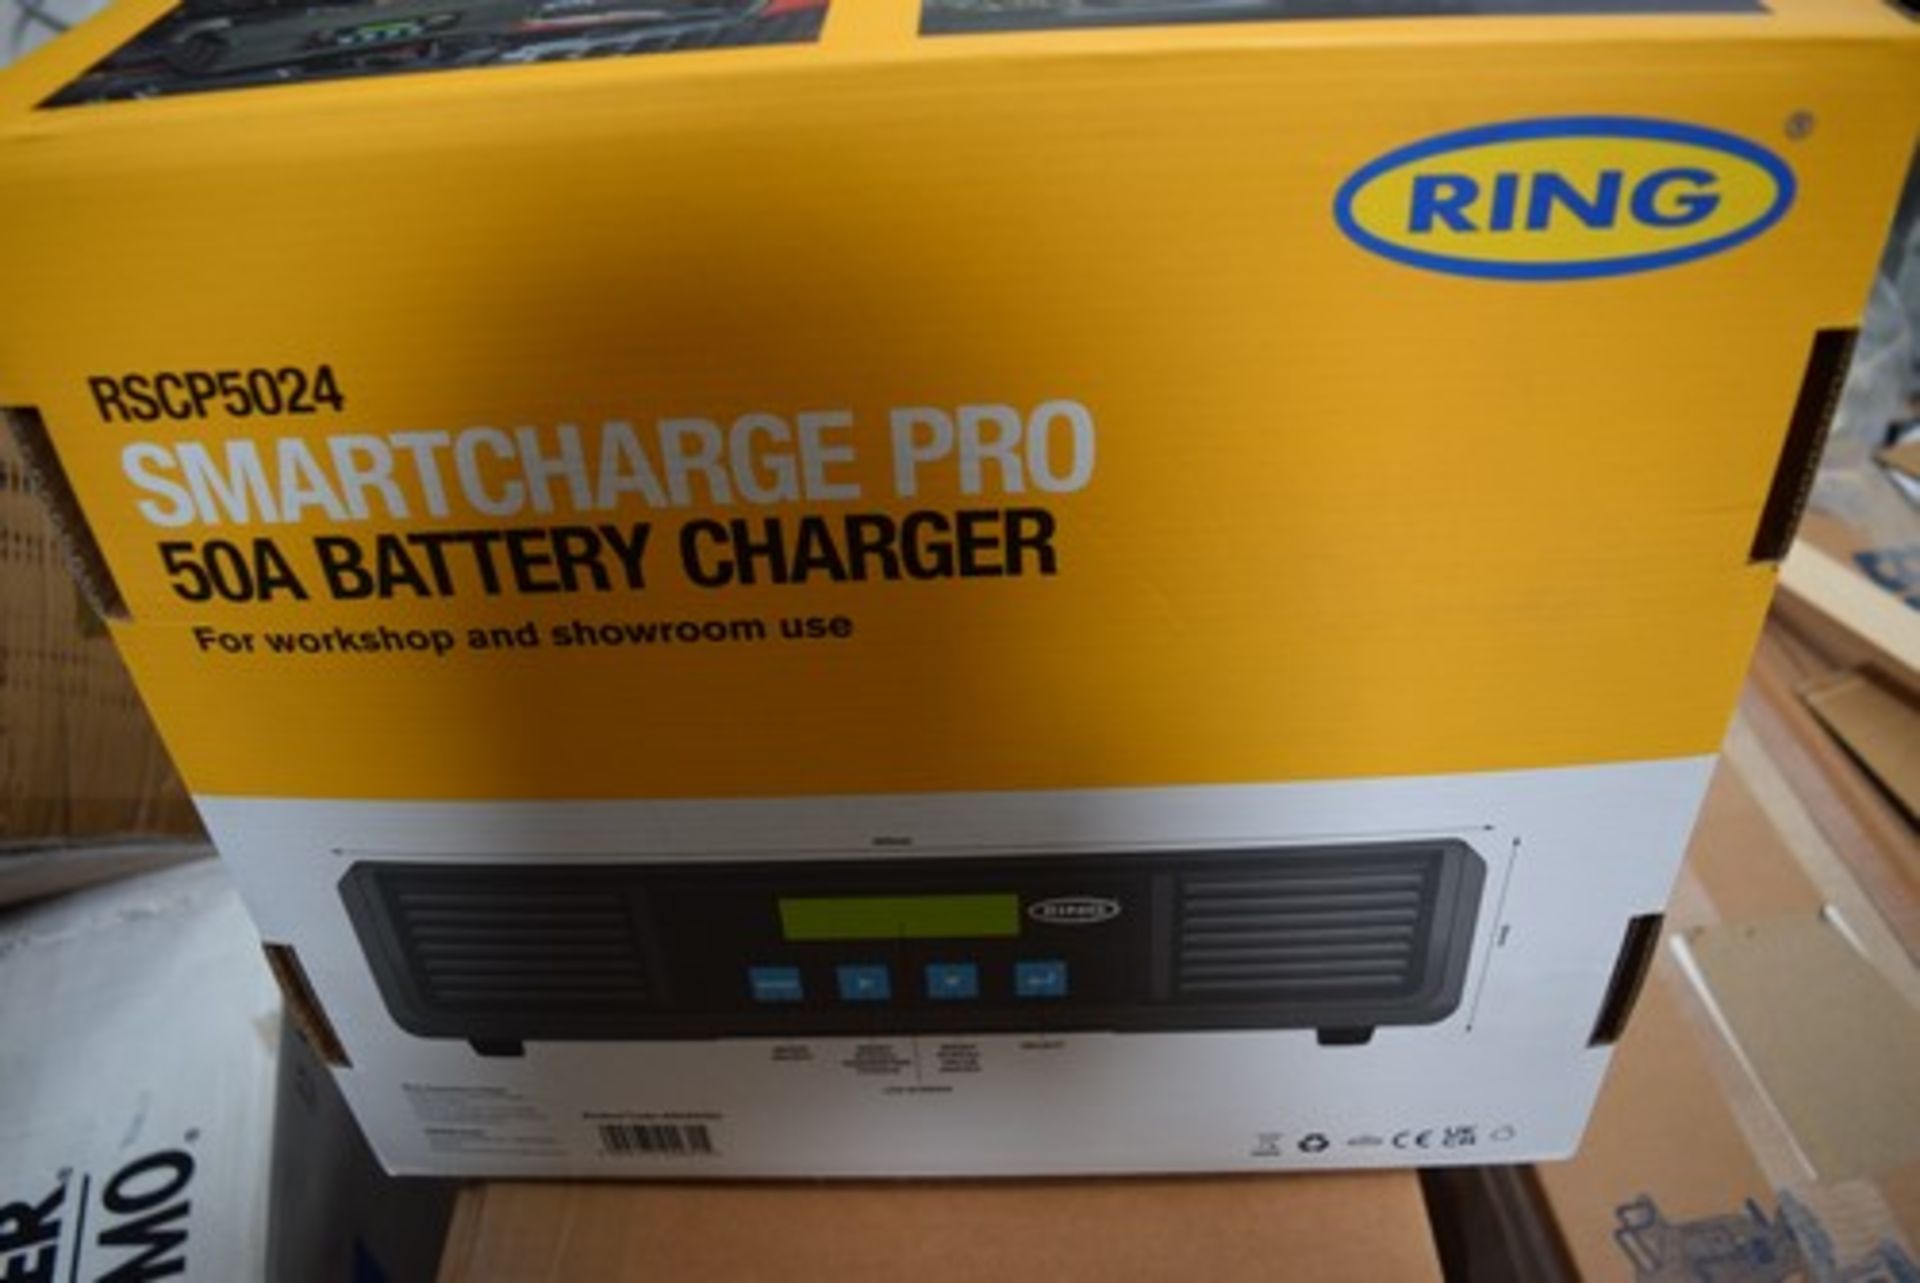 1 x Ring smart charge pro battery charger, Model RSCP 5024 - New in box (GS7)